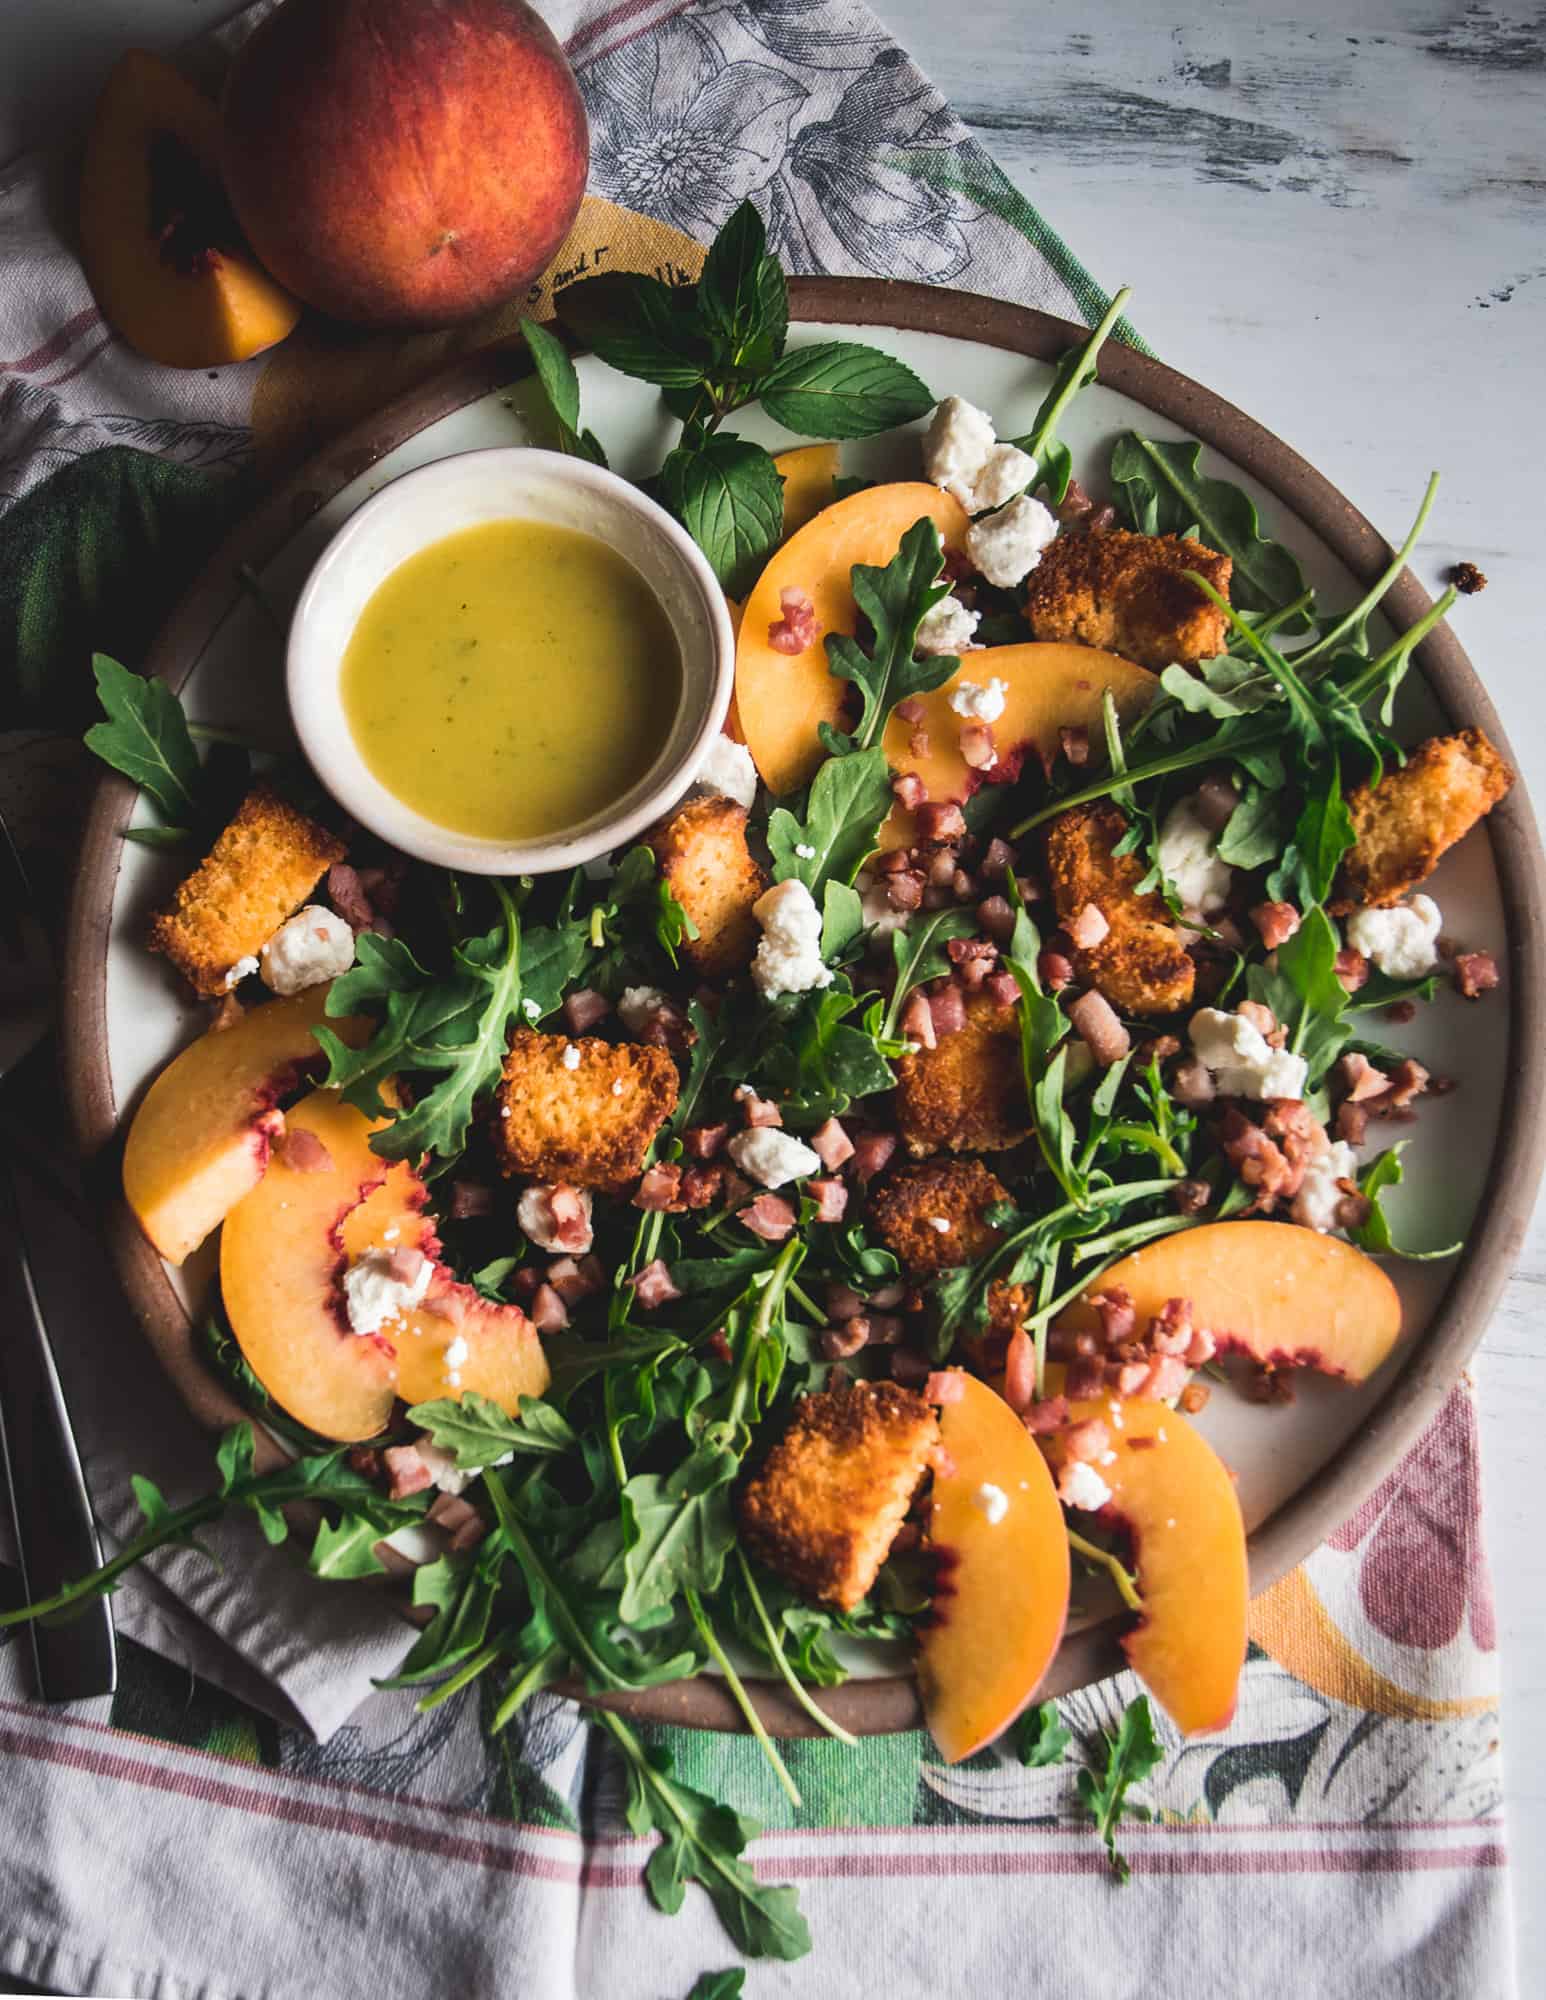 salad of arugula, peaches, goat cheese crumbles and croutons,